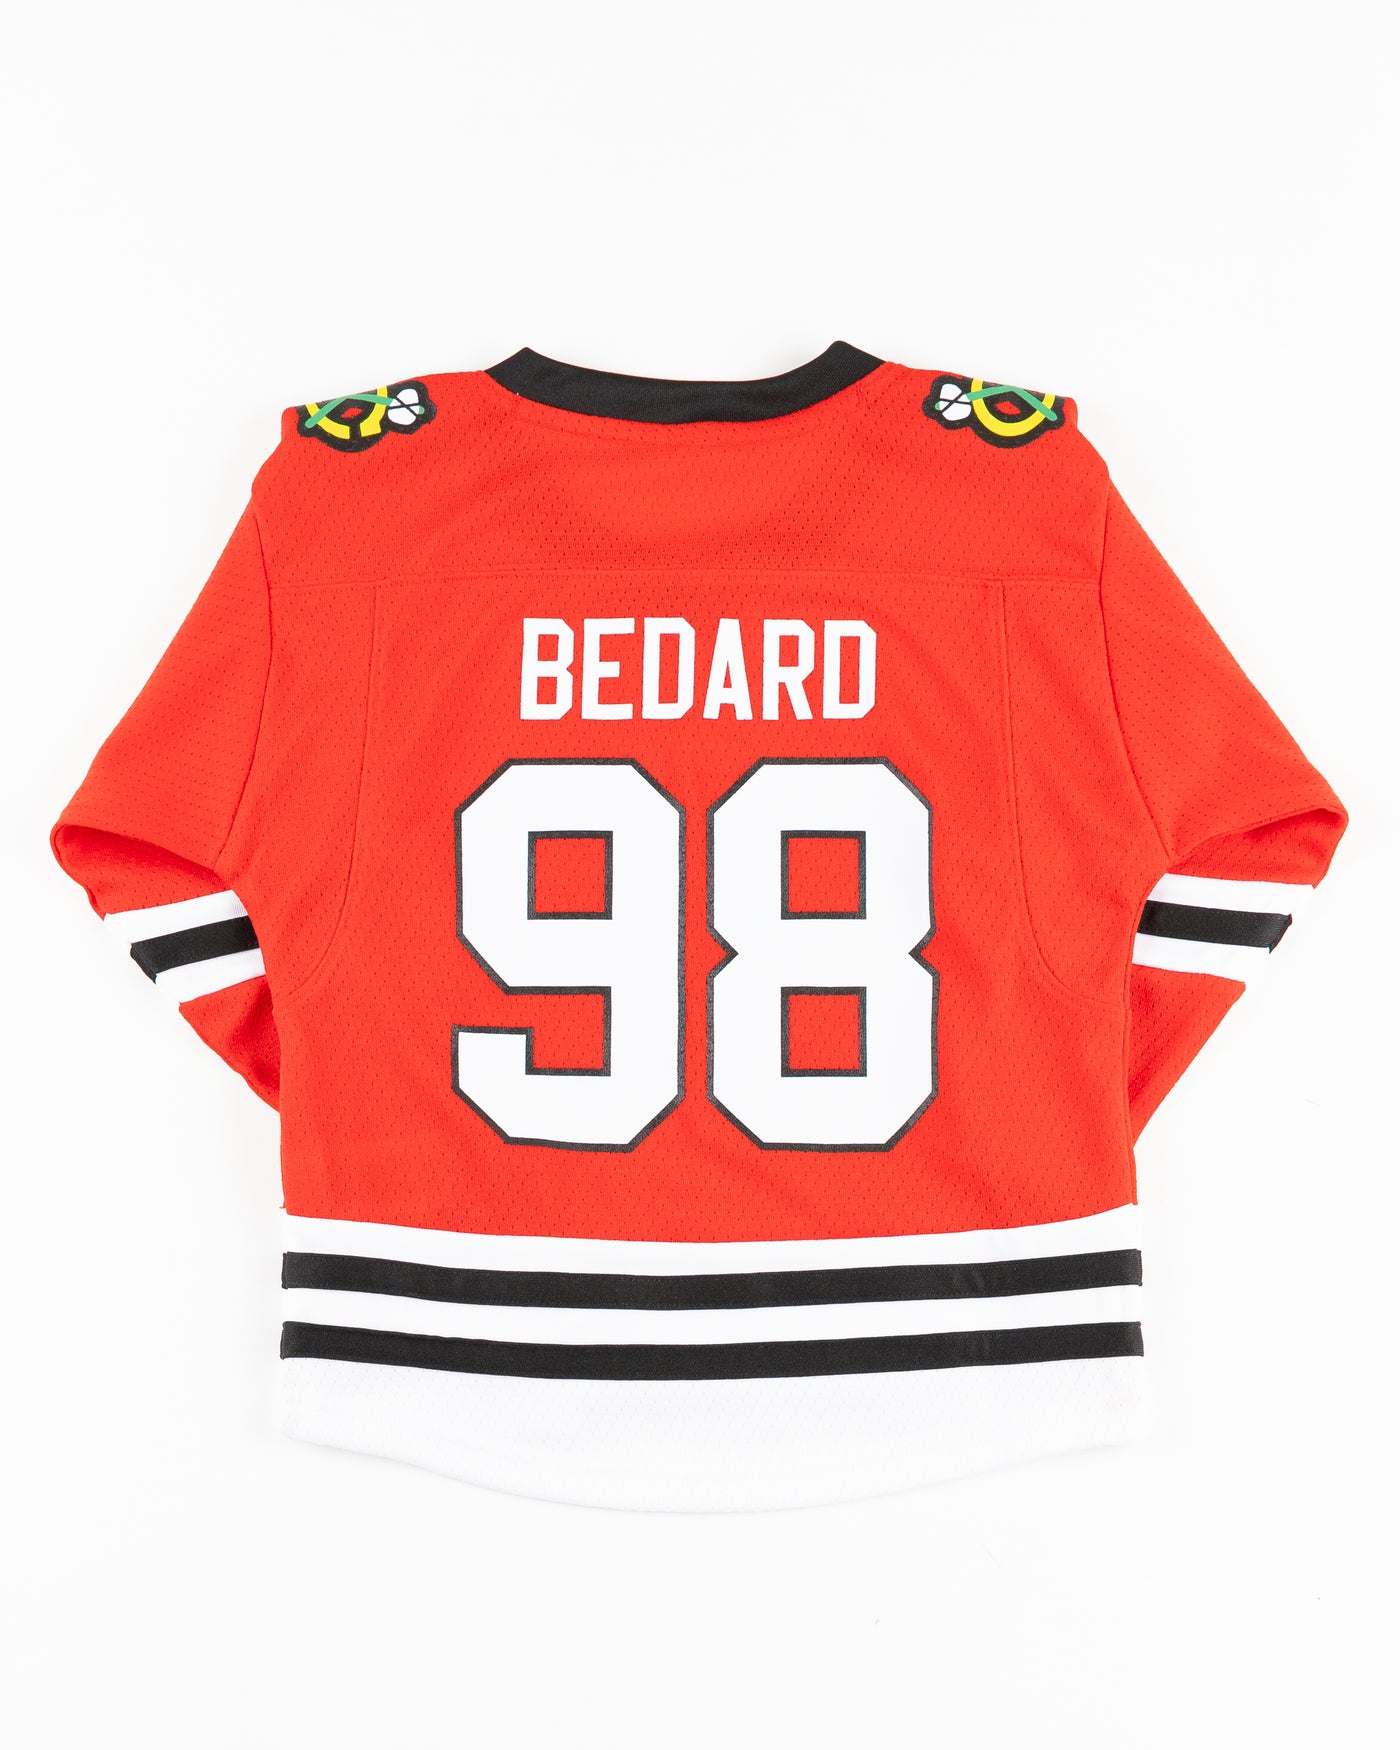 red home toddler Chicago Blackhawks Bedard jersey - back lay flat